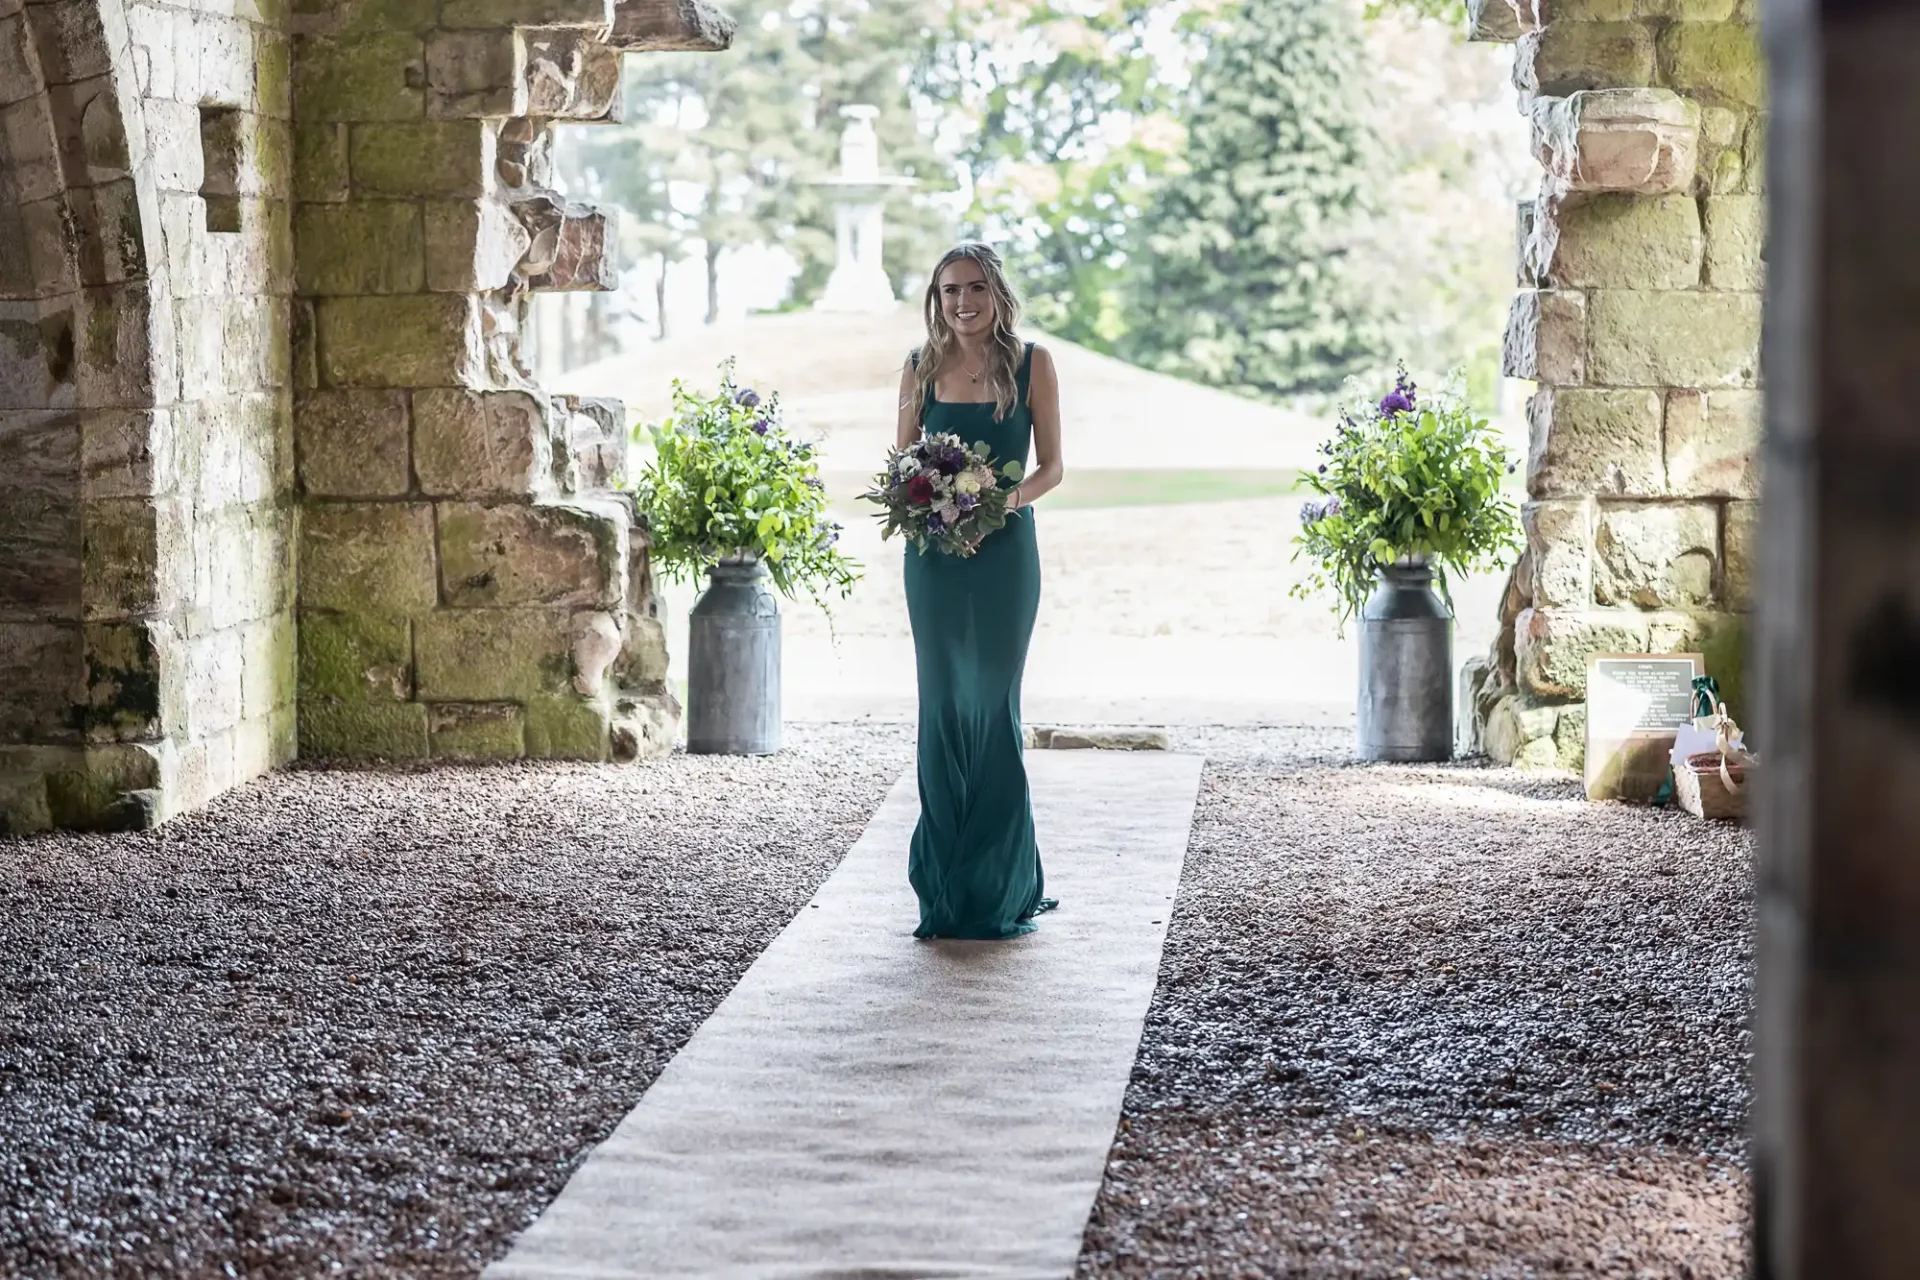 A woman in a long teal dress walks down an outdoor aisle, holding a bouquet, with stone archways and greenery in the background.